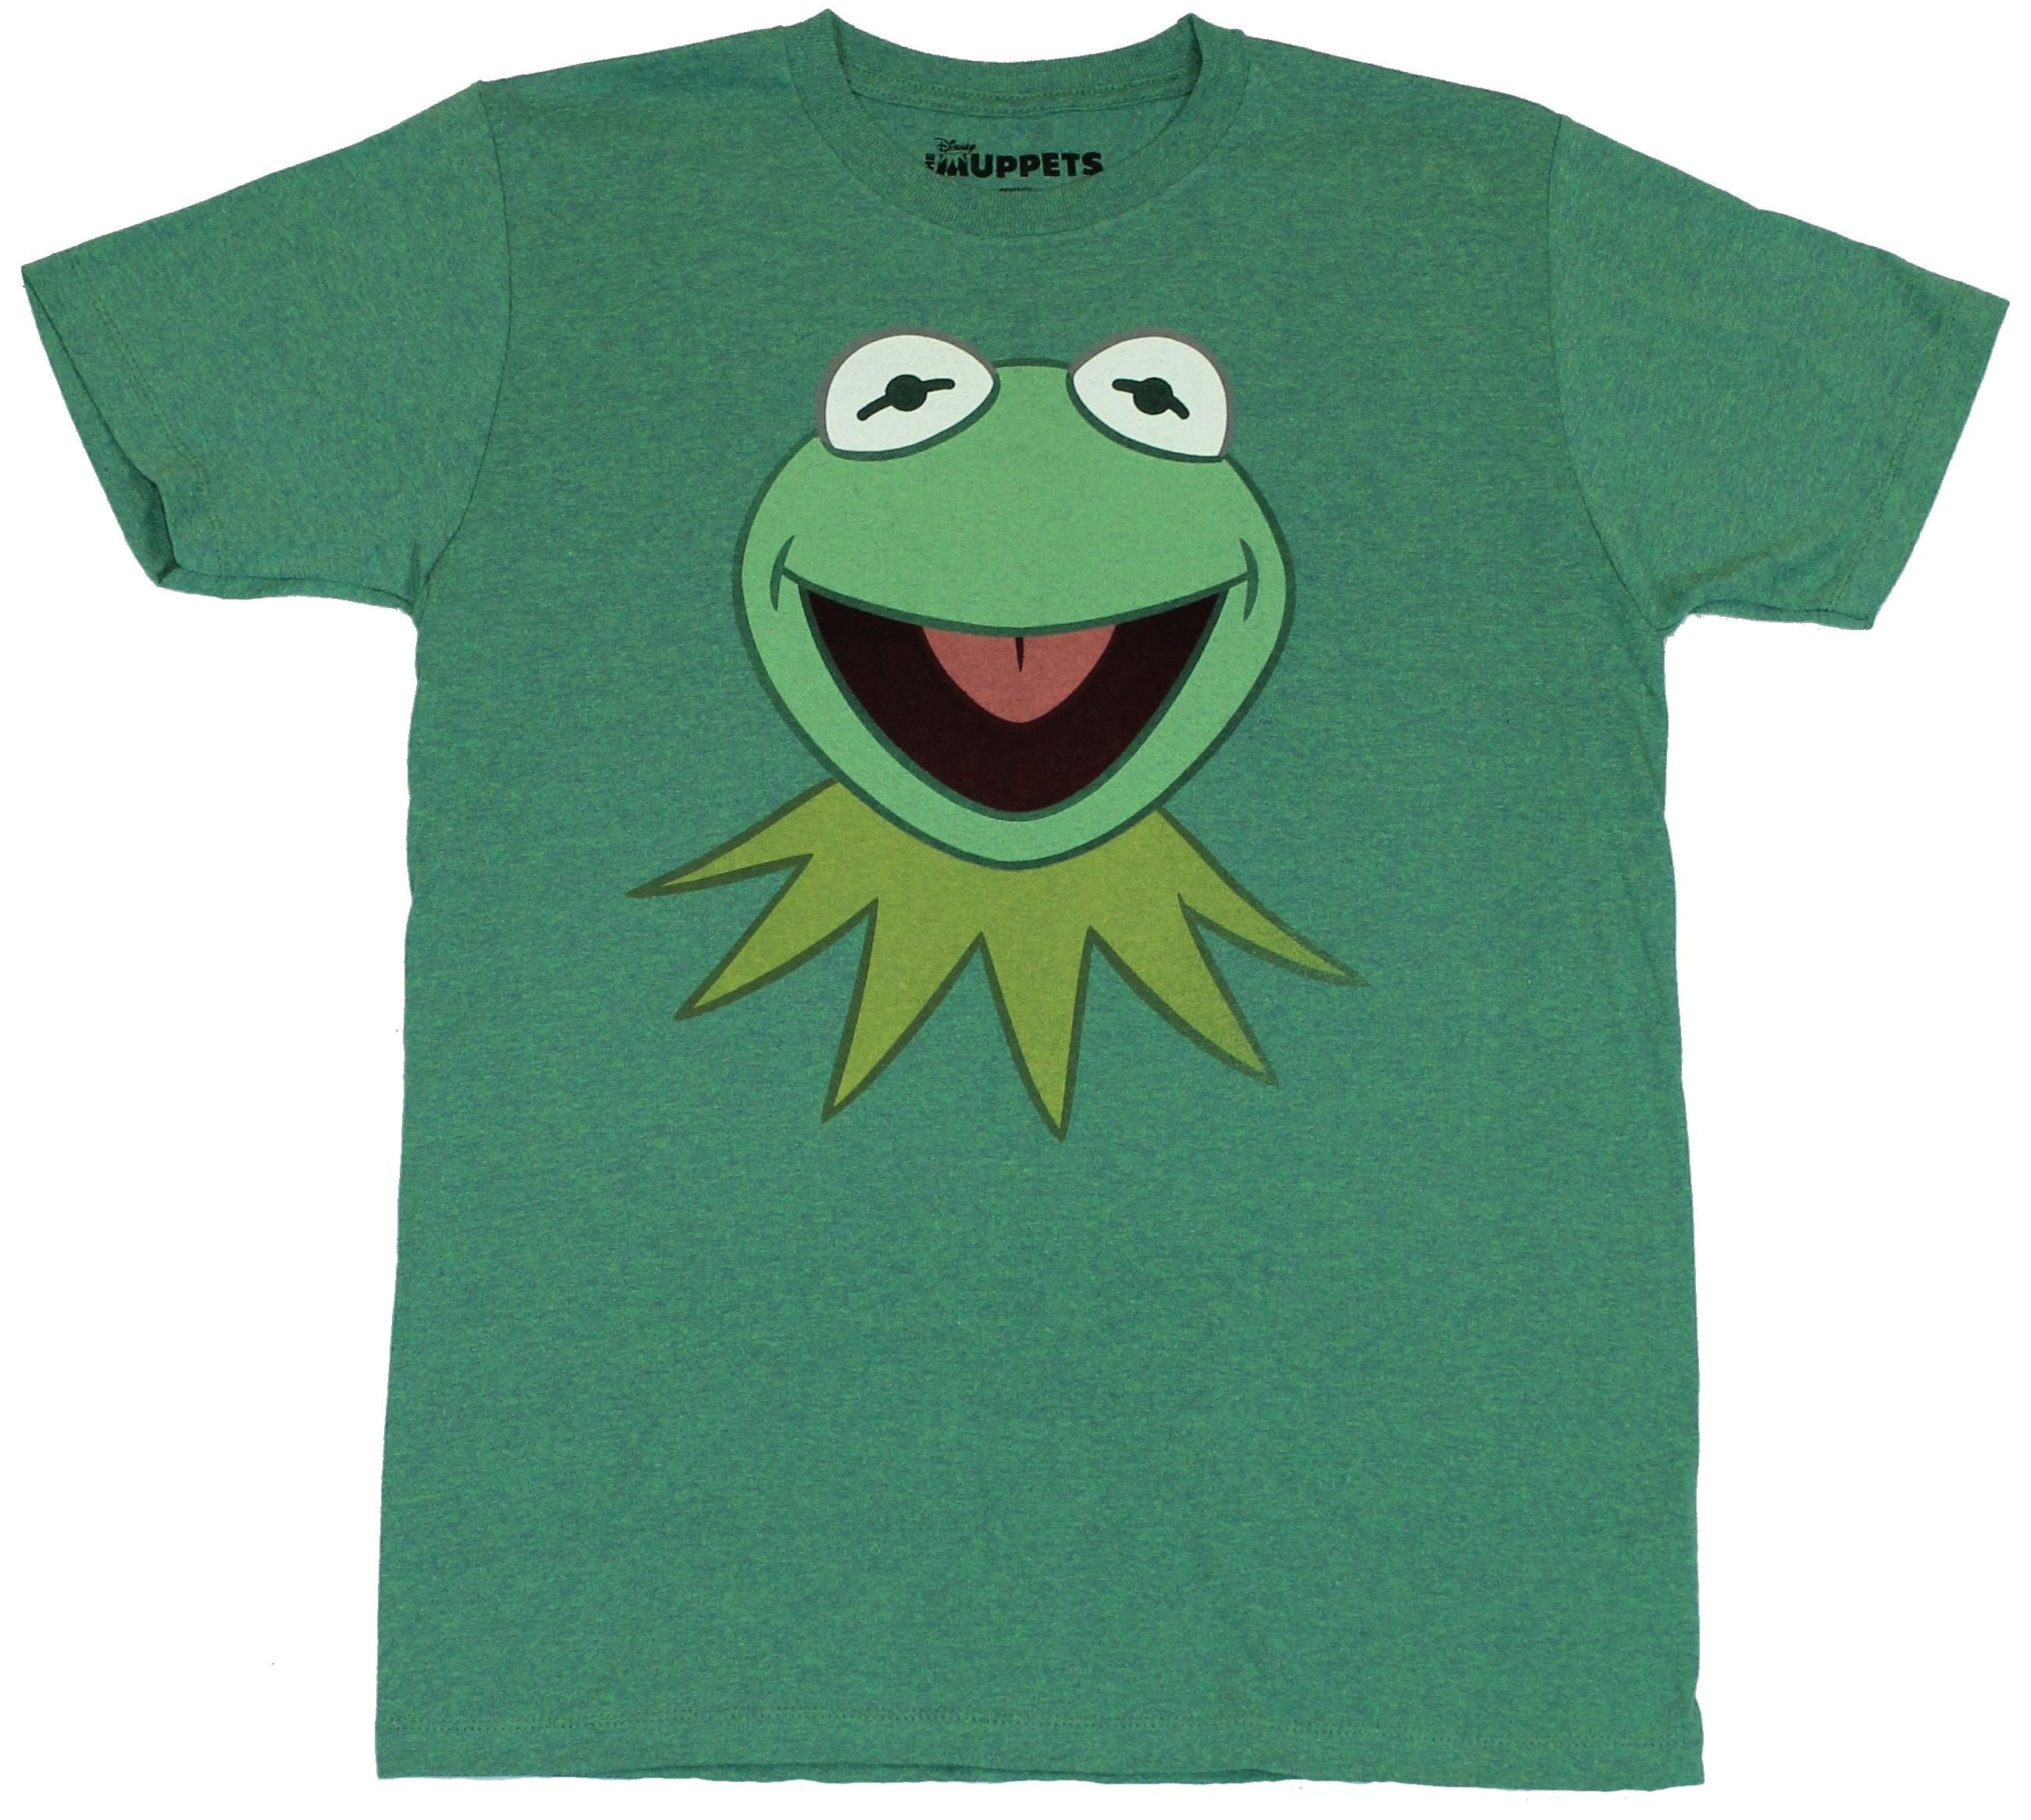 The Muppets Mens T-Shirt - Happy Smiling Kermit Head Image